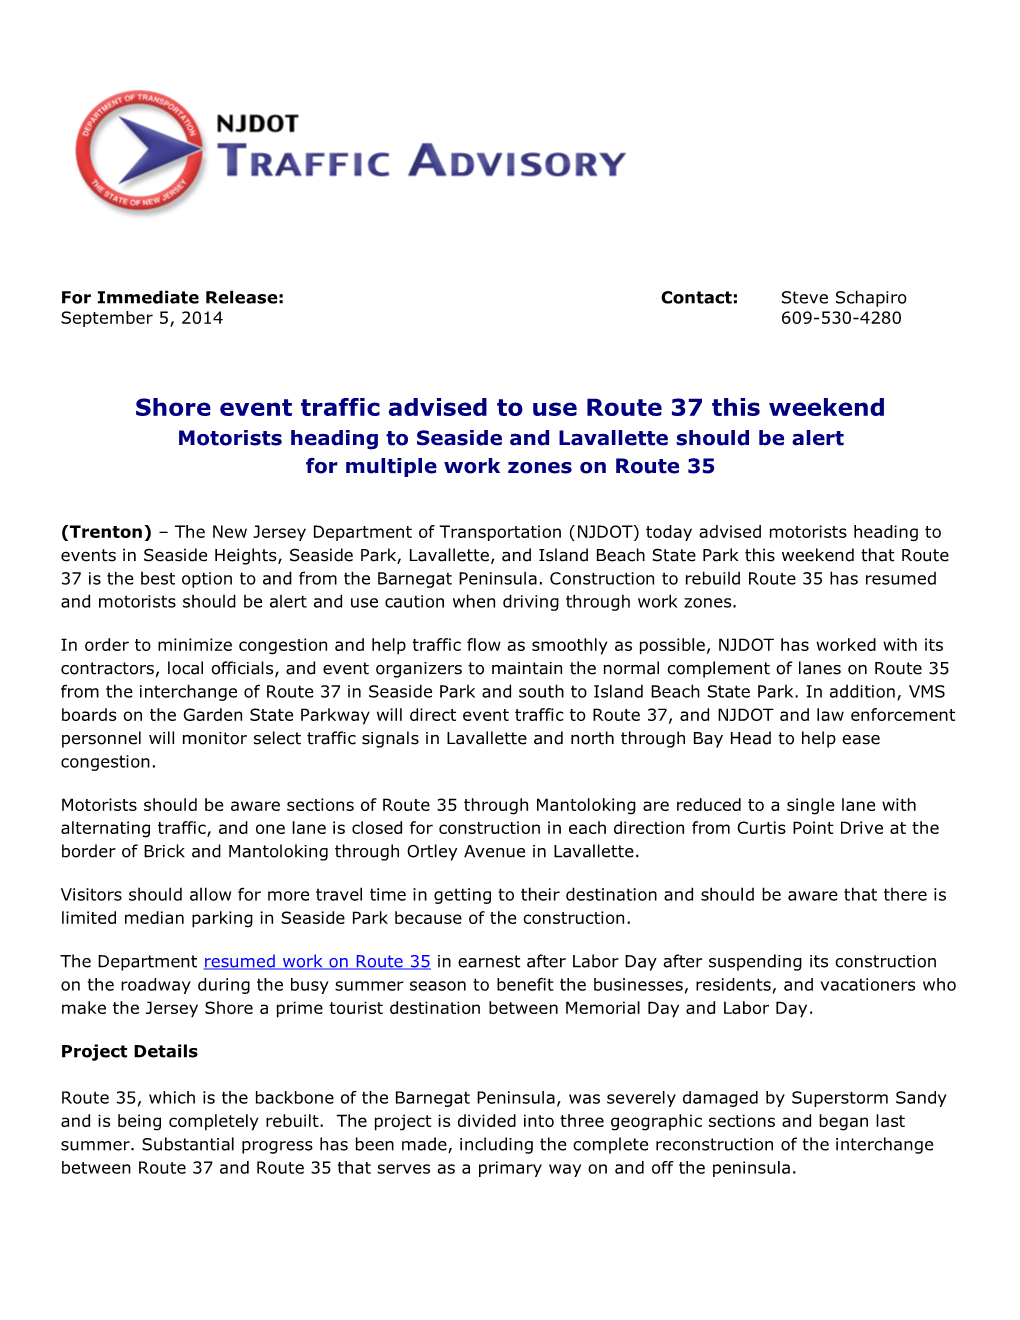 Shore Event Traffic Advised to Use Route 37 This Weekend Motorists Heading to Seaside and Lavallette Should Be Alert for Multiple Work Zones on Route 35